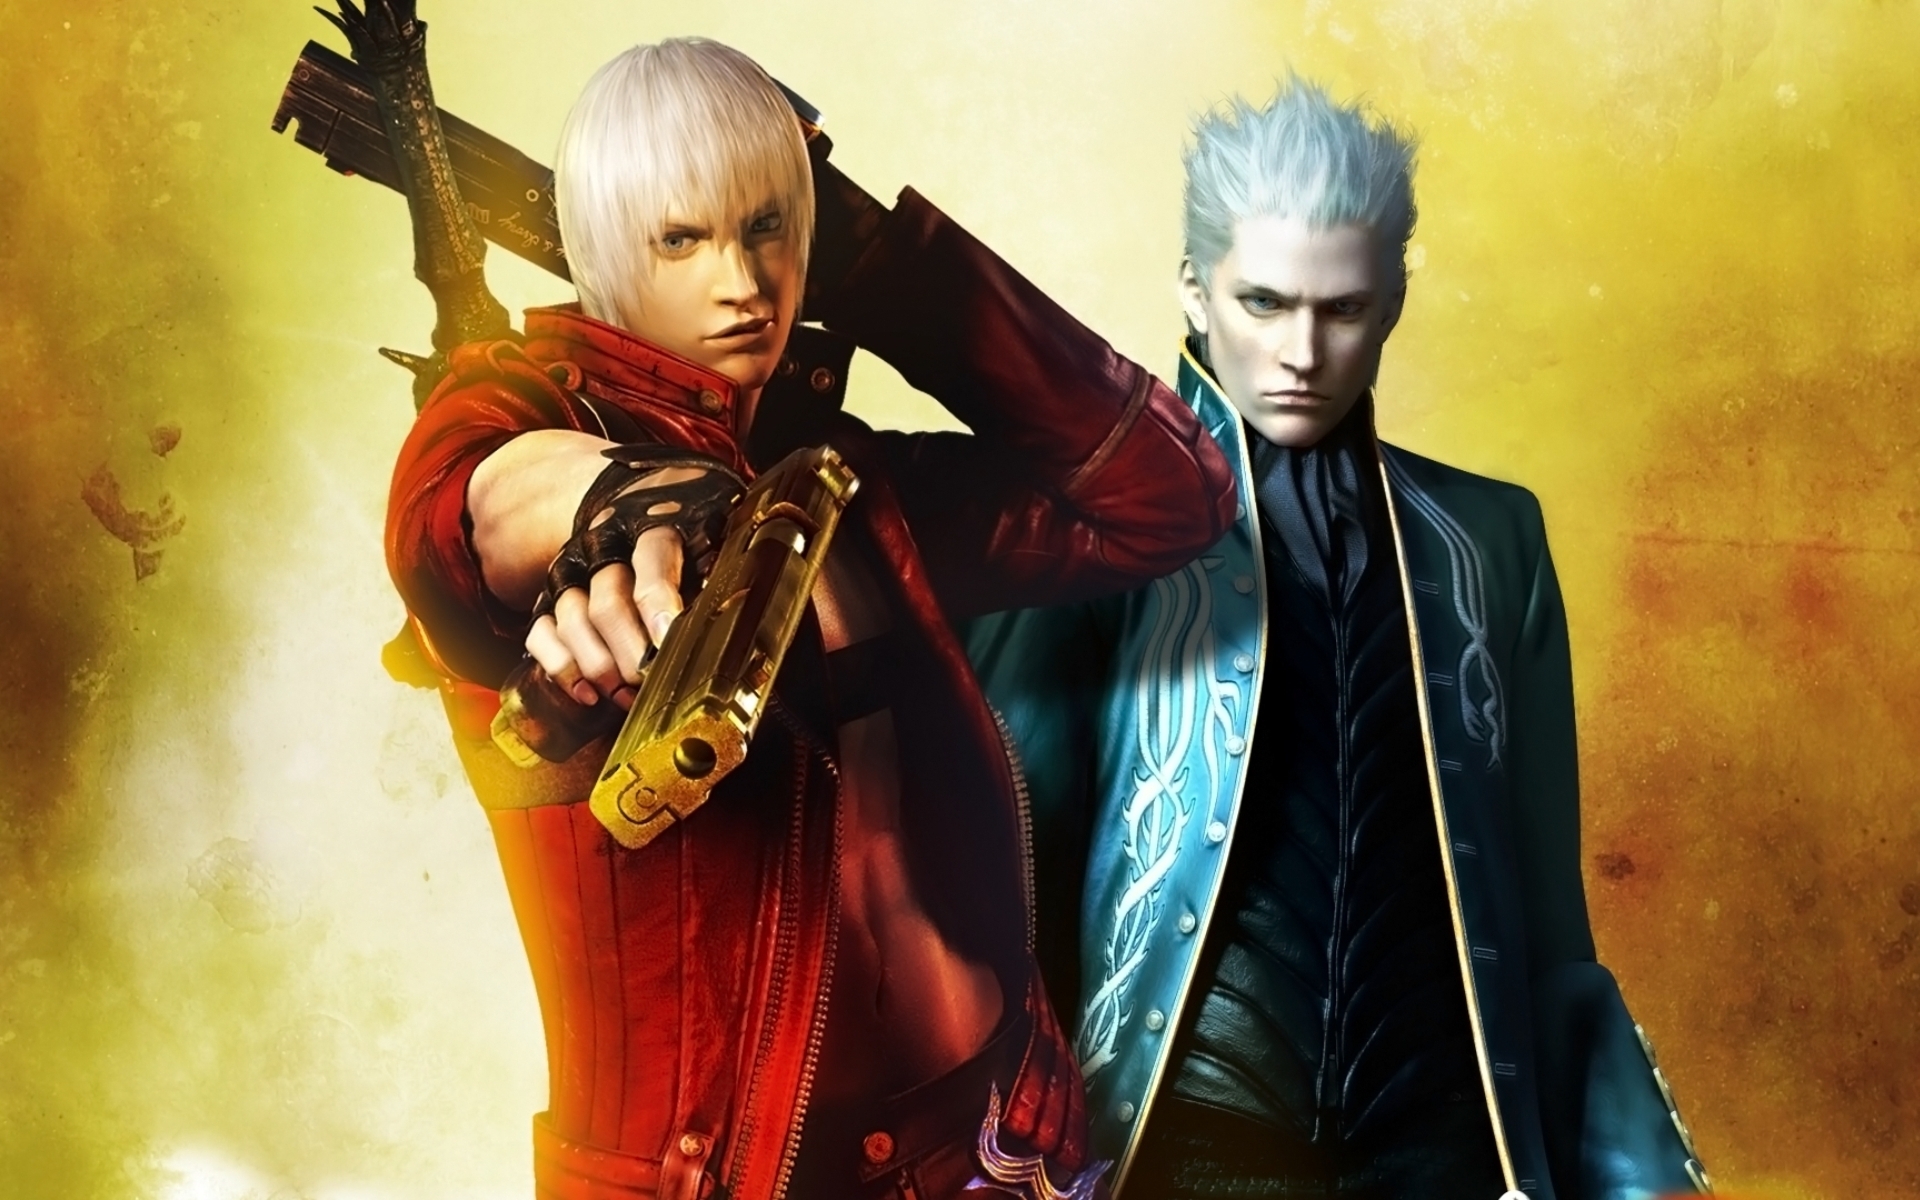 Devil may cry 3 for 1920 x 1200 widescreen resolution